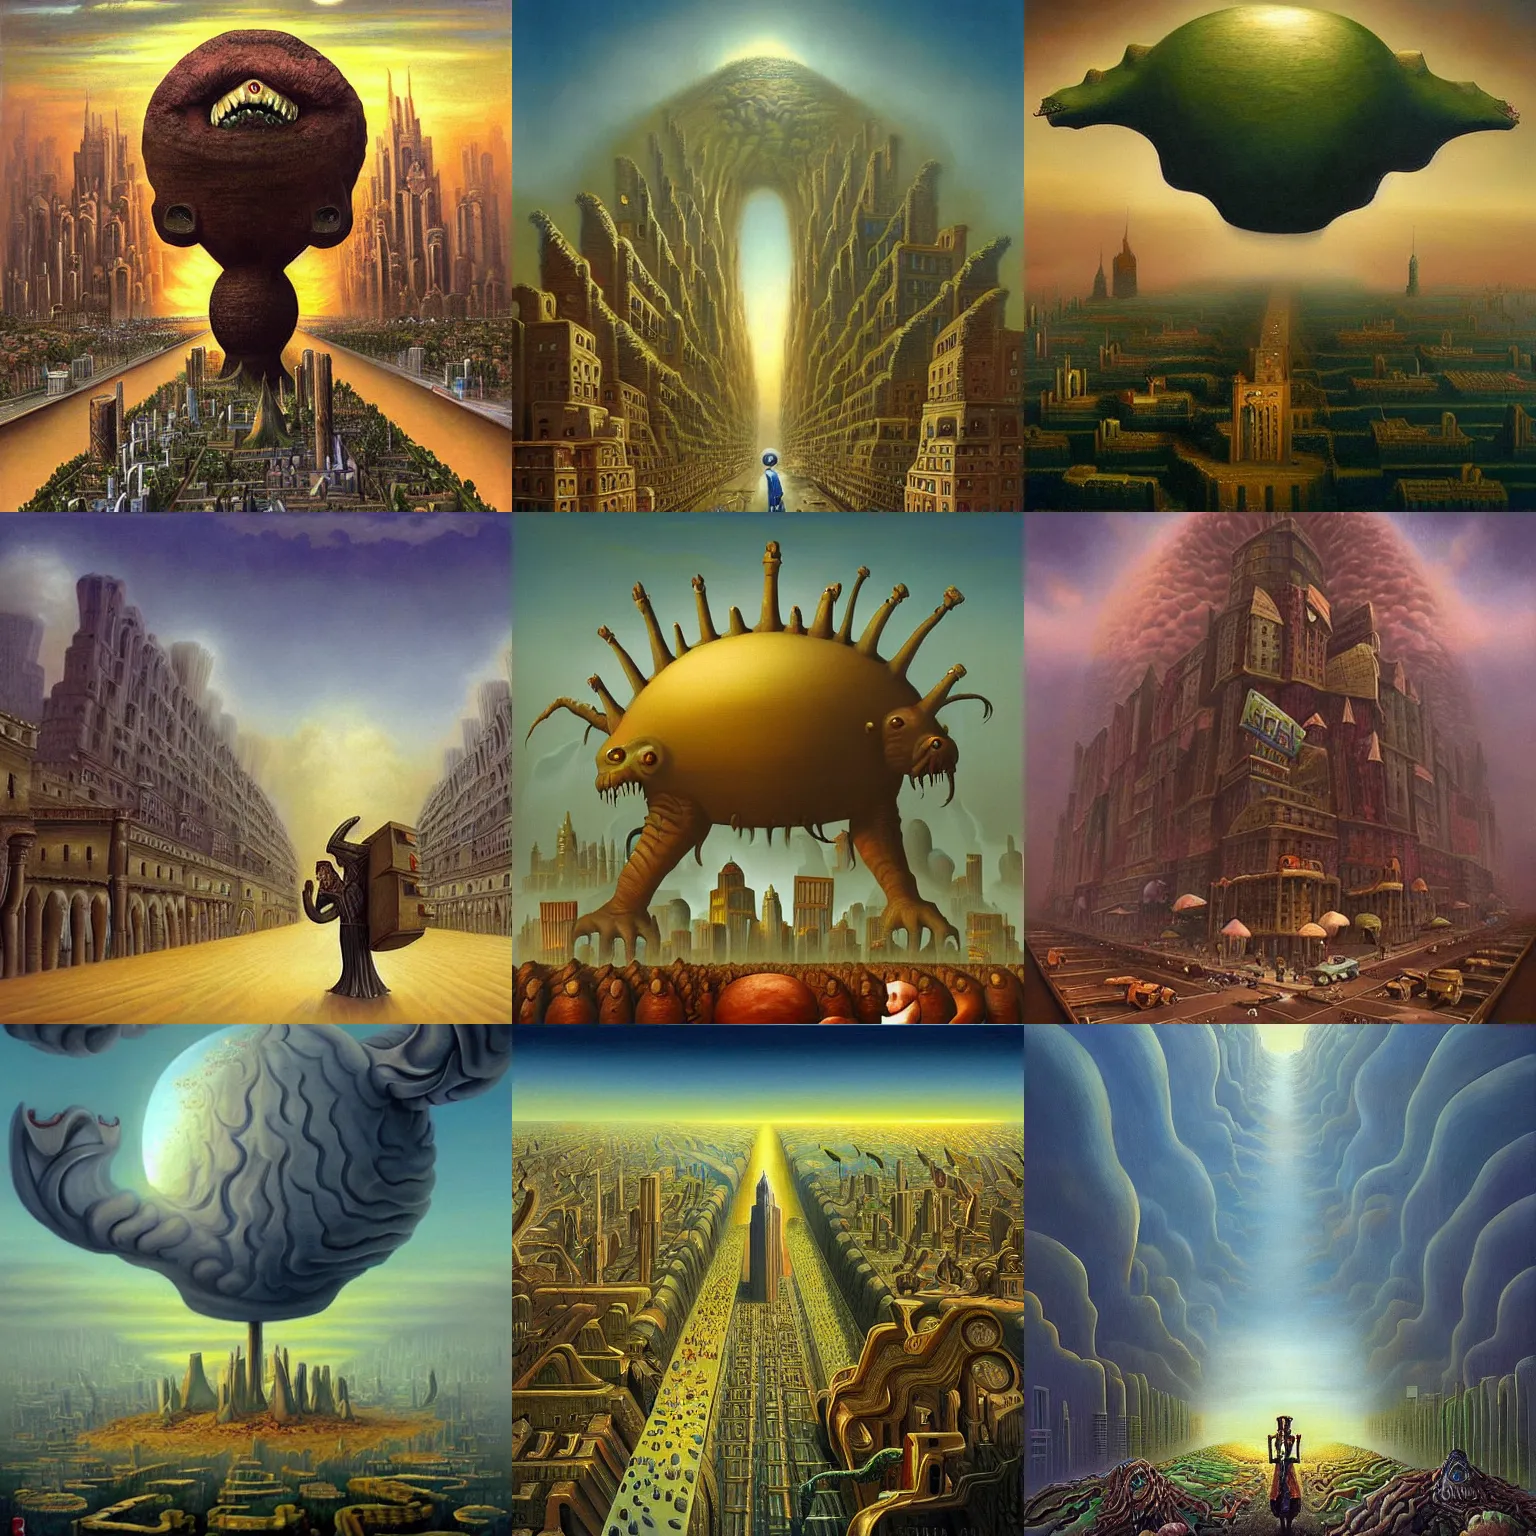 Prompt: A surreal painting of a monster carrying an entire city on it's back , Vladimir Kush